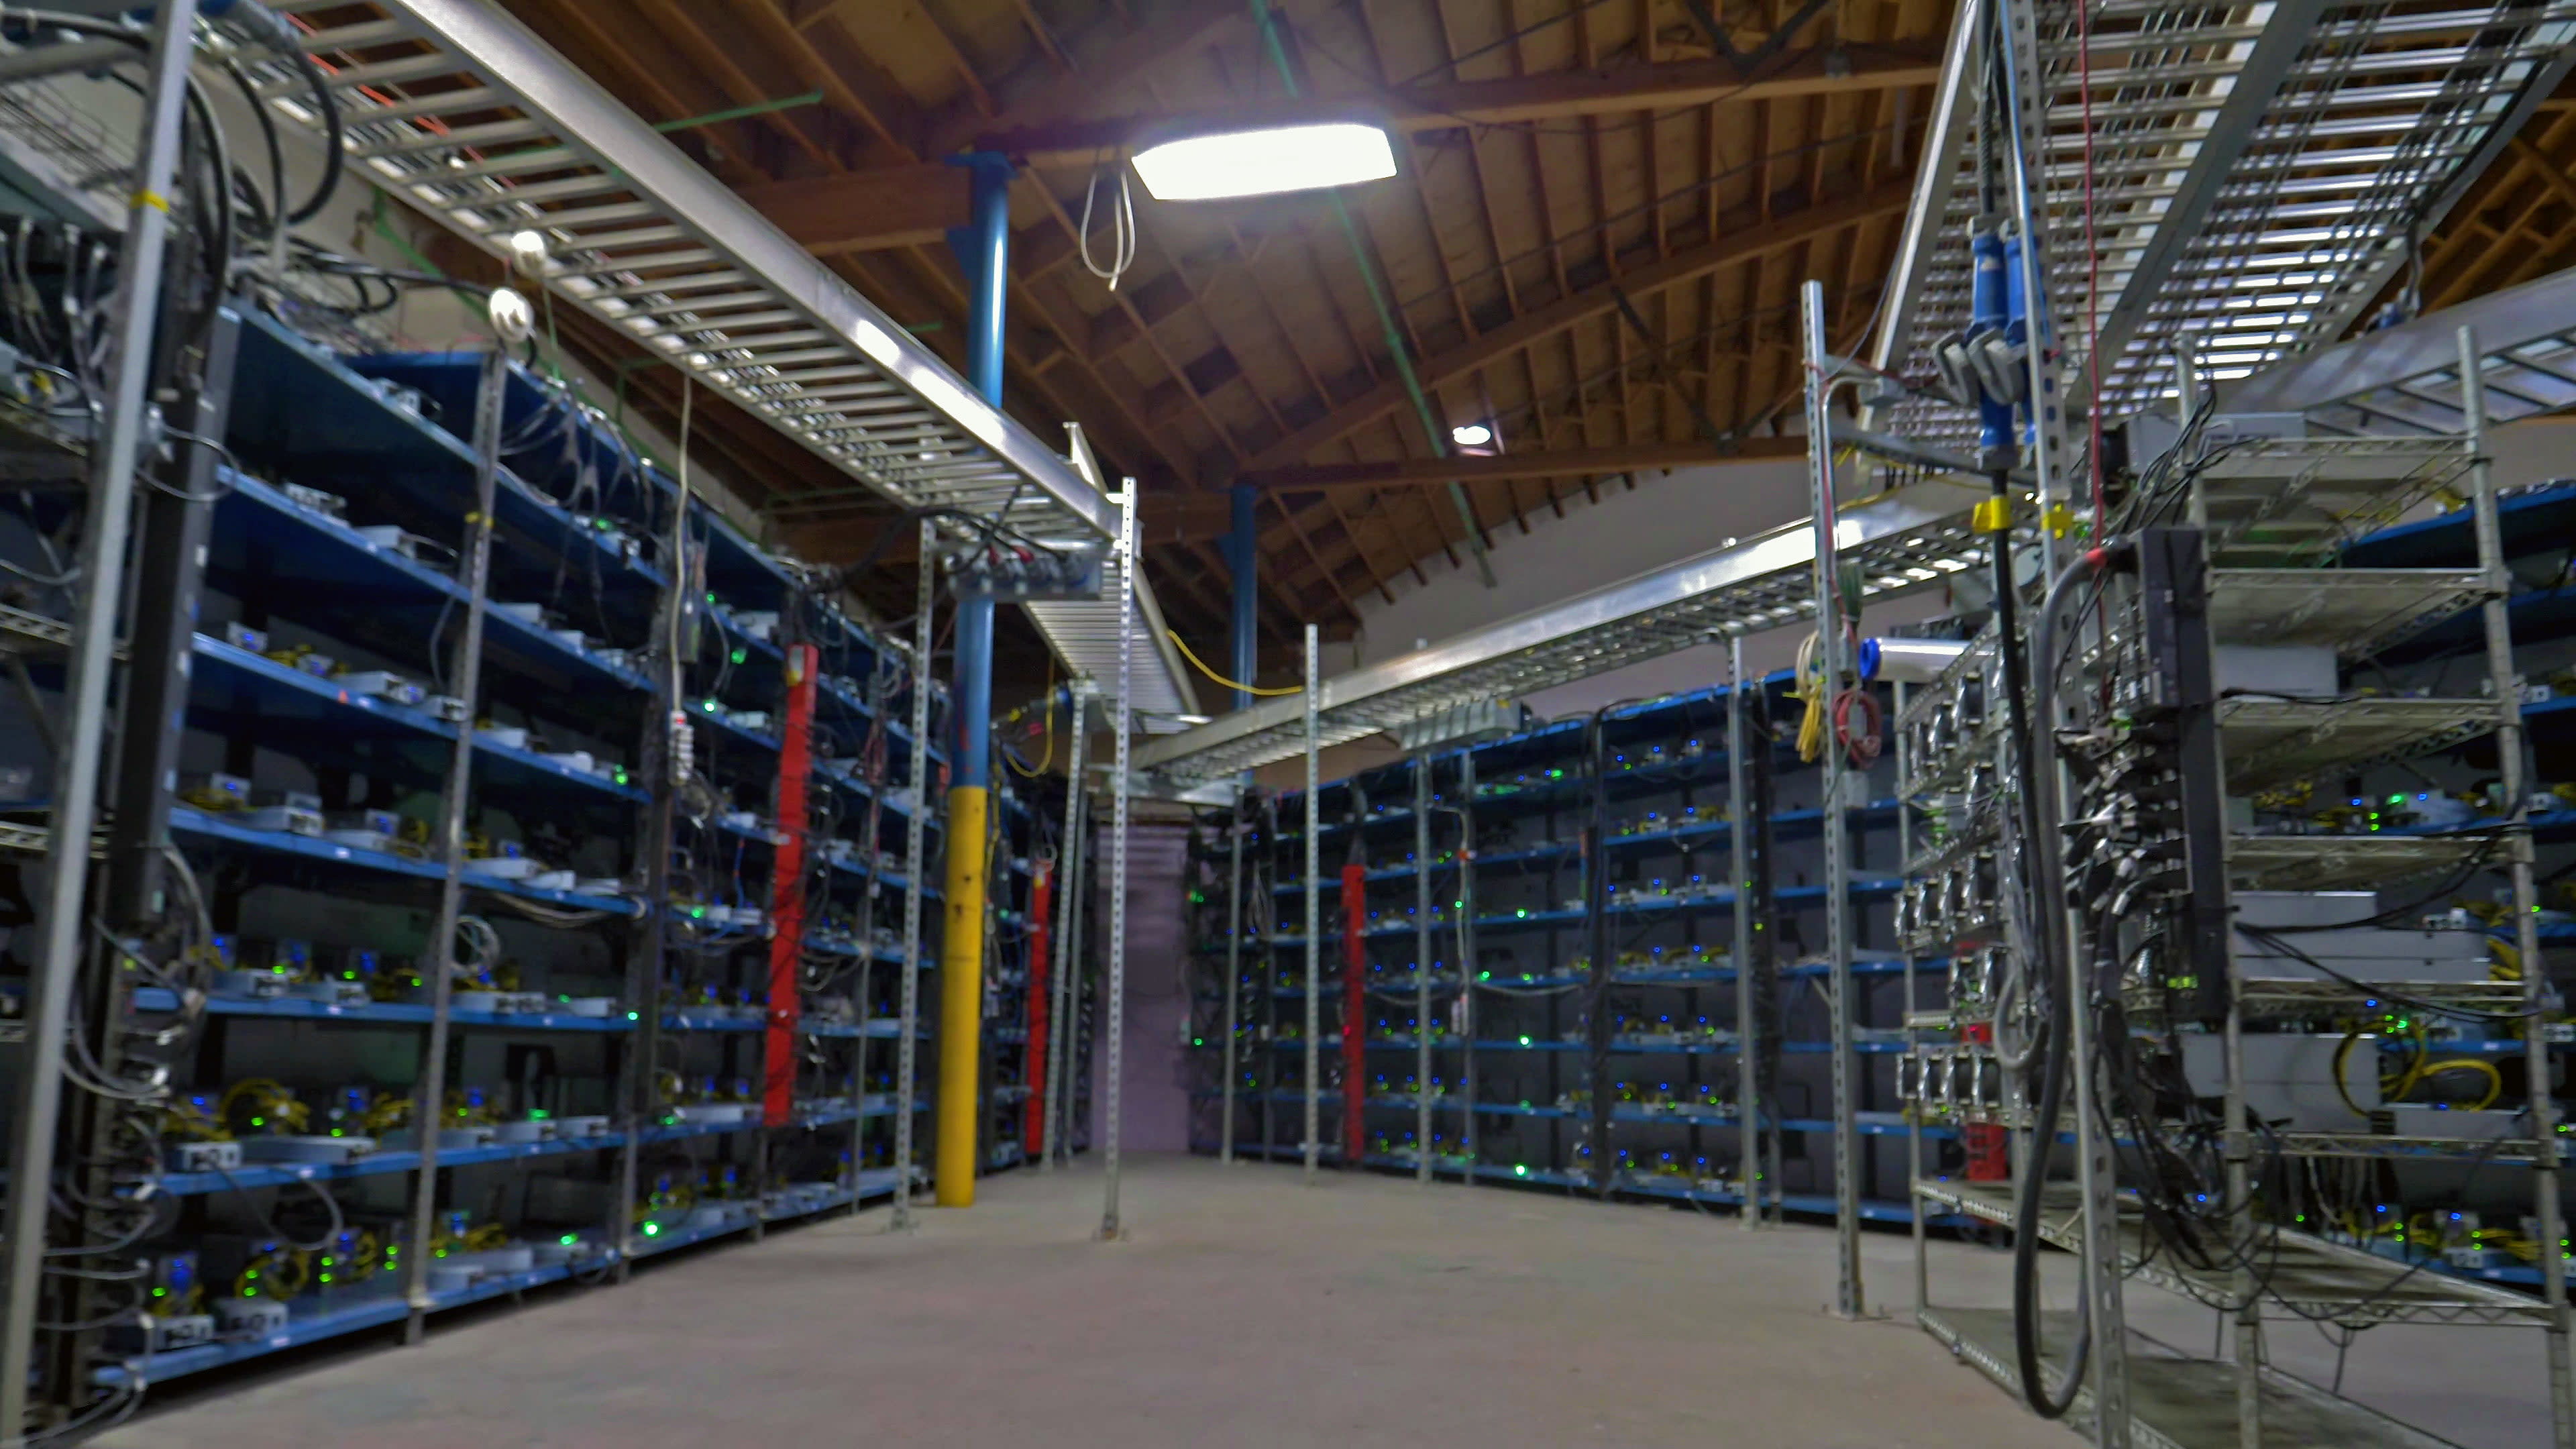 These are the largest Bitcoin mining farms in the world